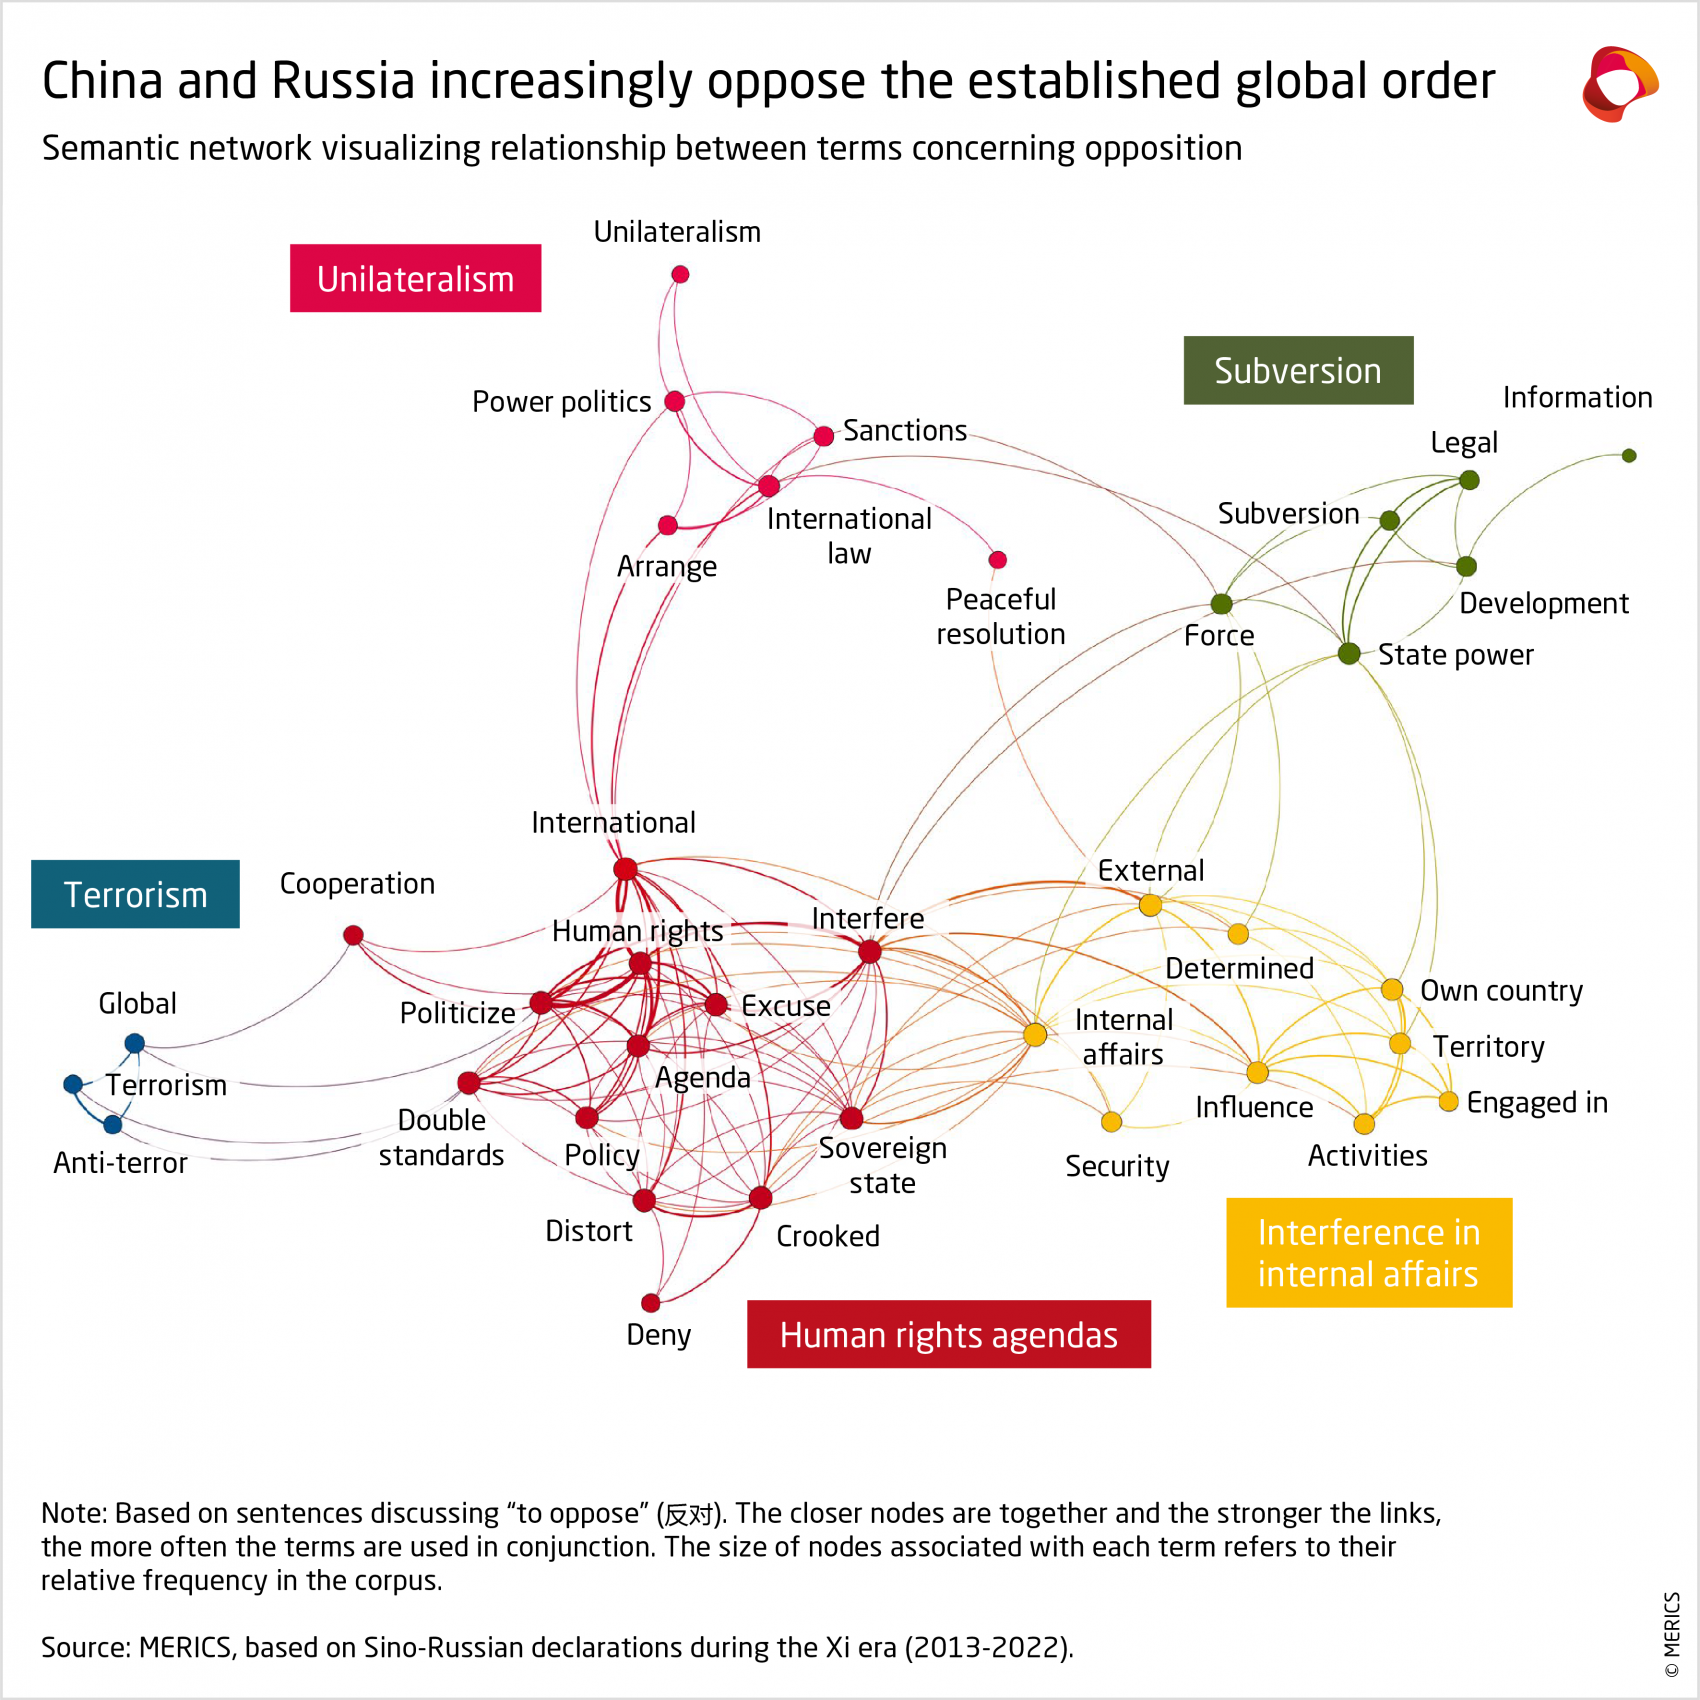 220616_Sino-Russia-Analysis-Semantic-network-visualizing-relationship-between-terms-concerning-opposition